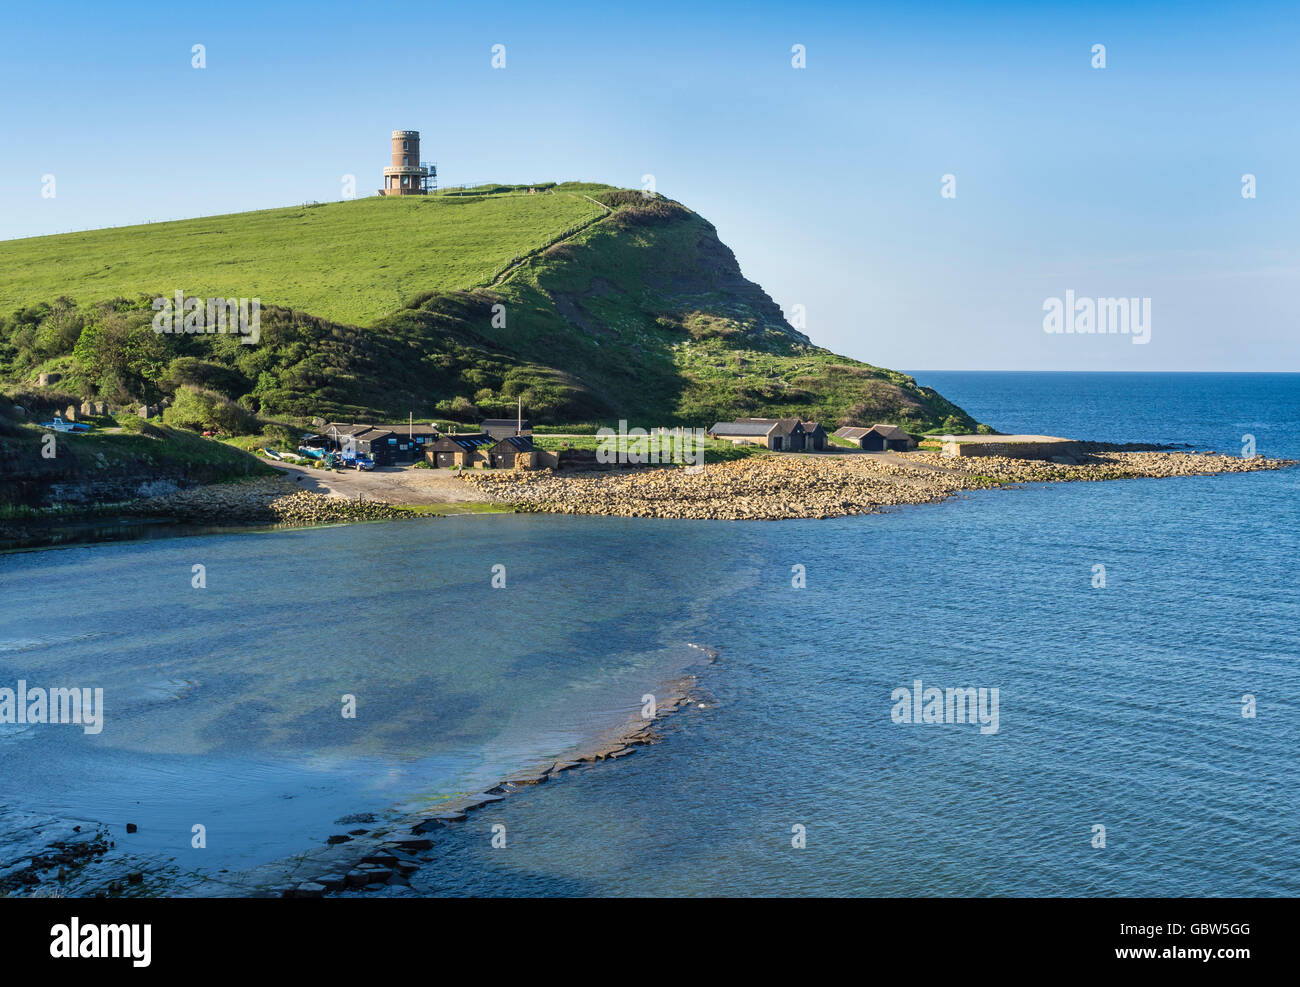 Clavell Tower in Kimmeridge Bay, Isle of Purbeck, Dorset, England, UK Stock Photo